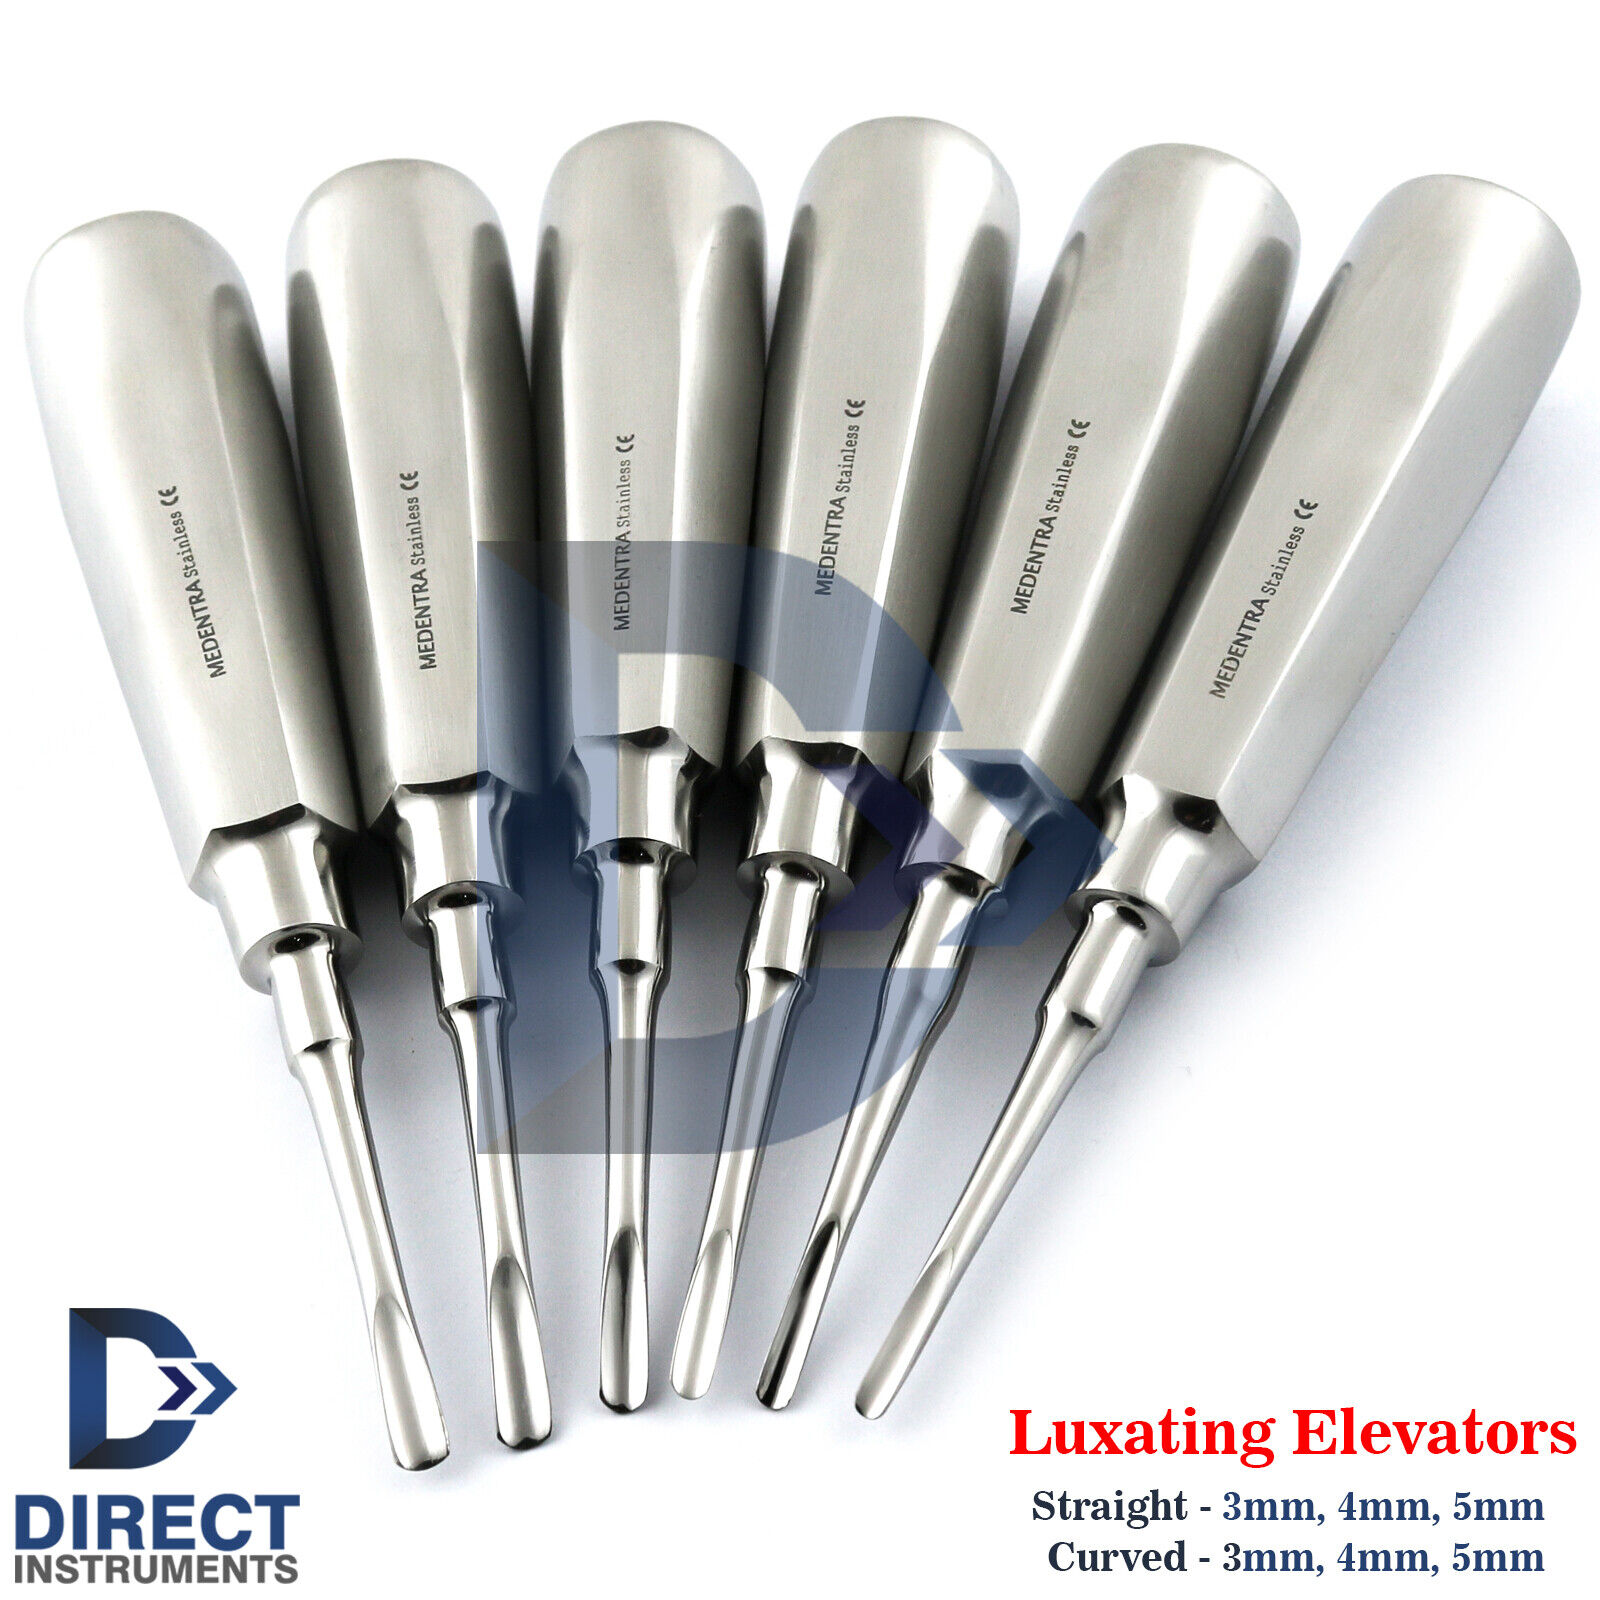 Set Of 6 Dental Luxating Elevators Straight Curved Shank Surgical Extraction Kit